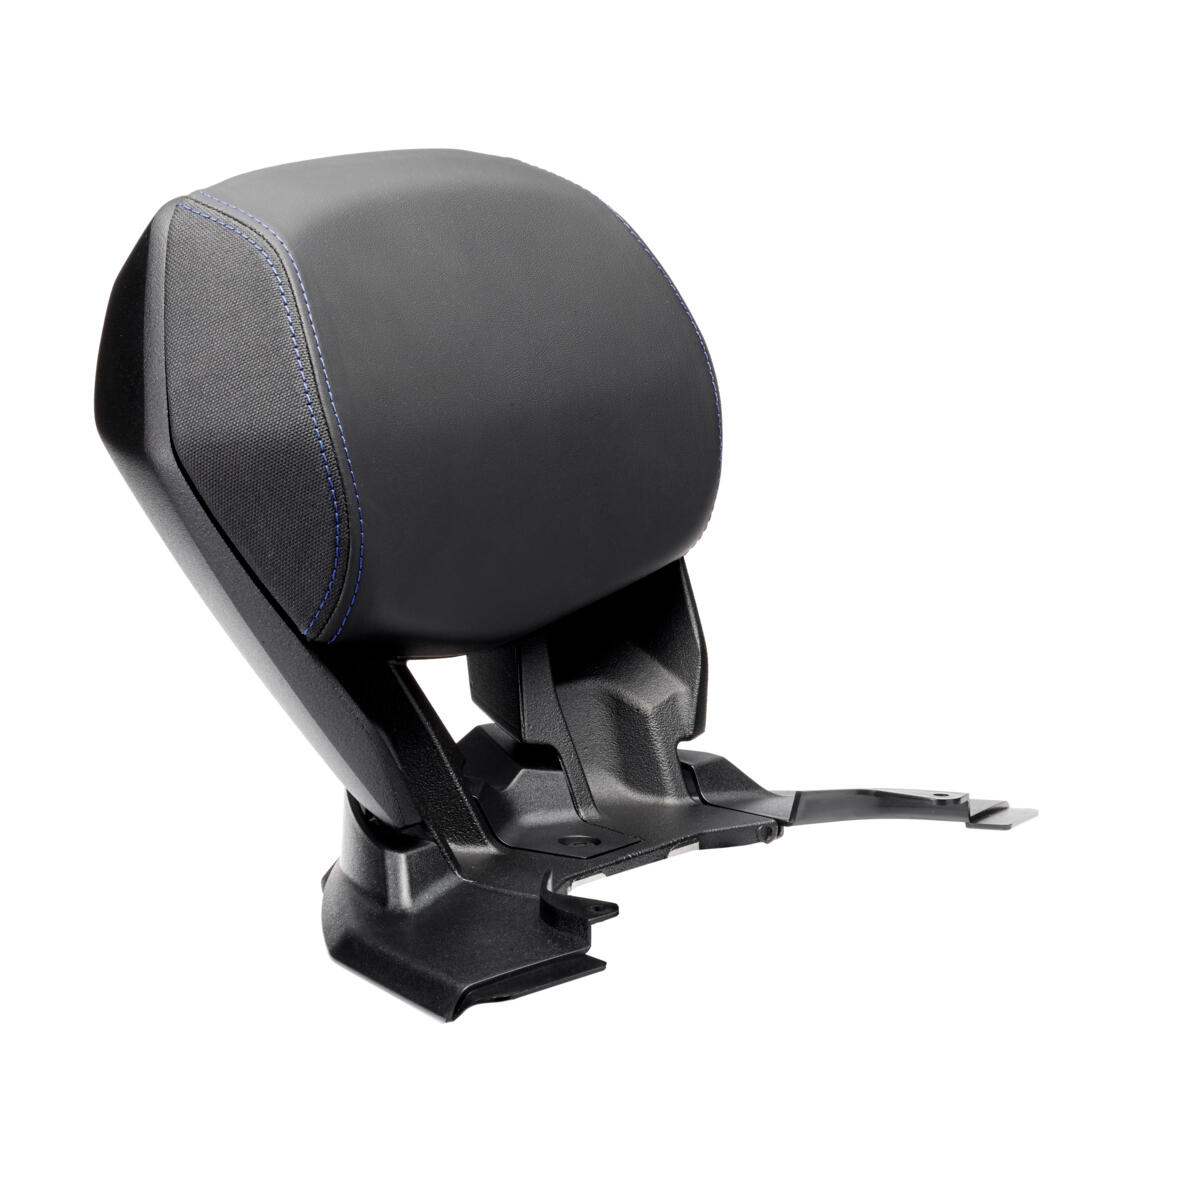 Cushion for the X-MAX' Passenger Backrest Stay.